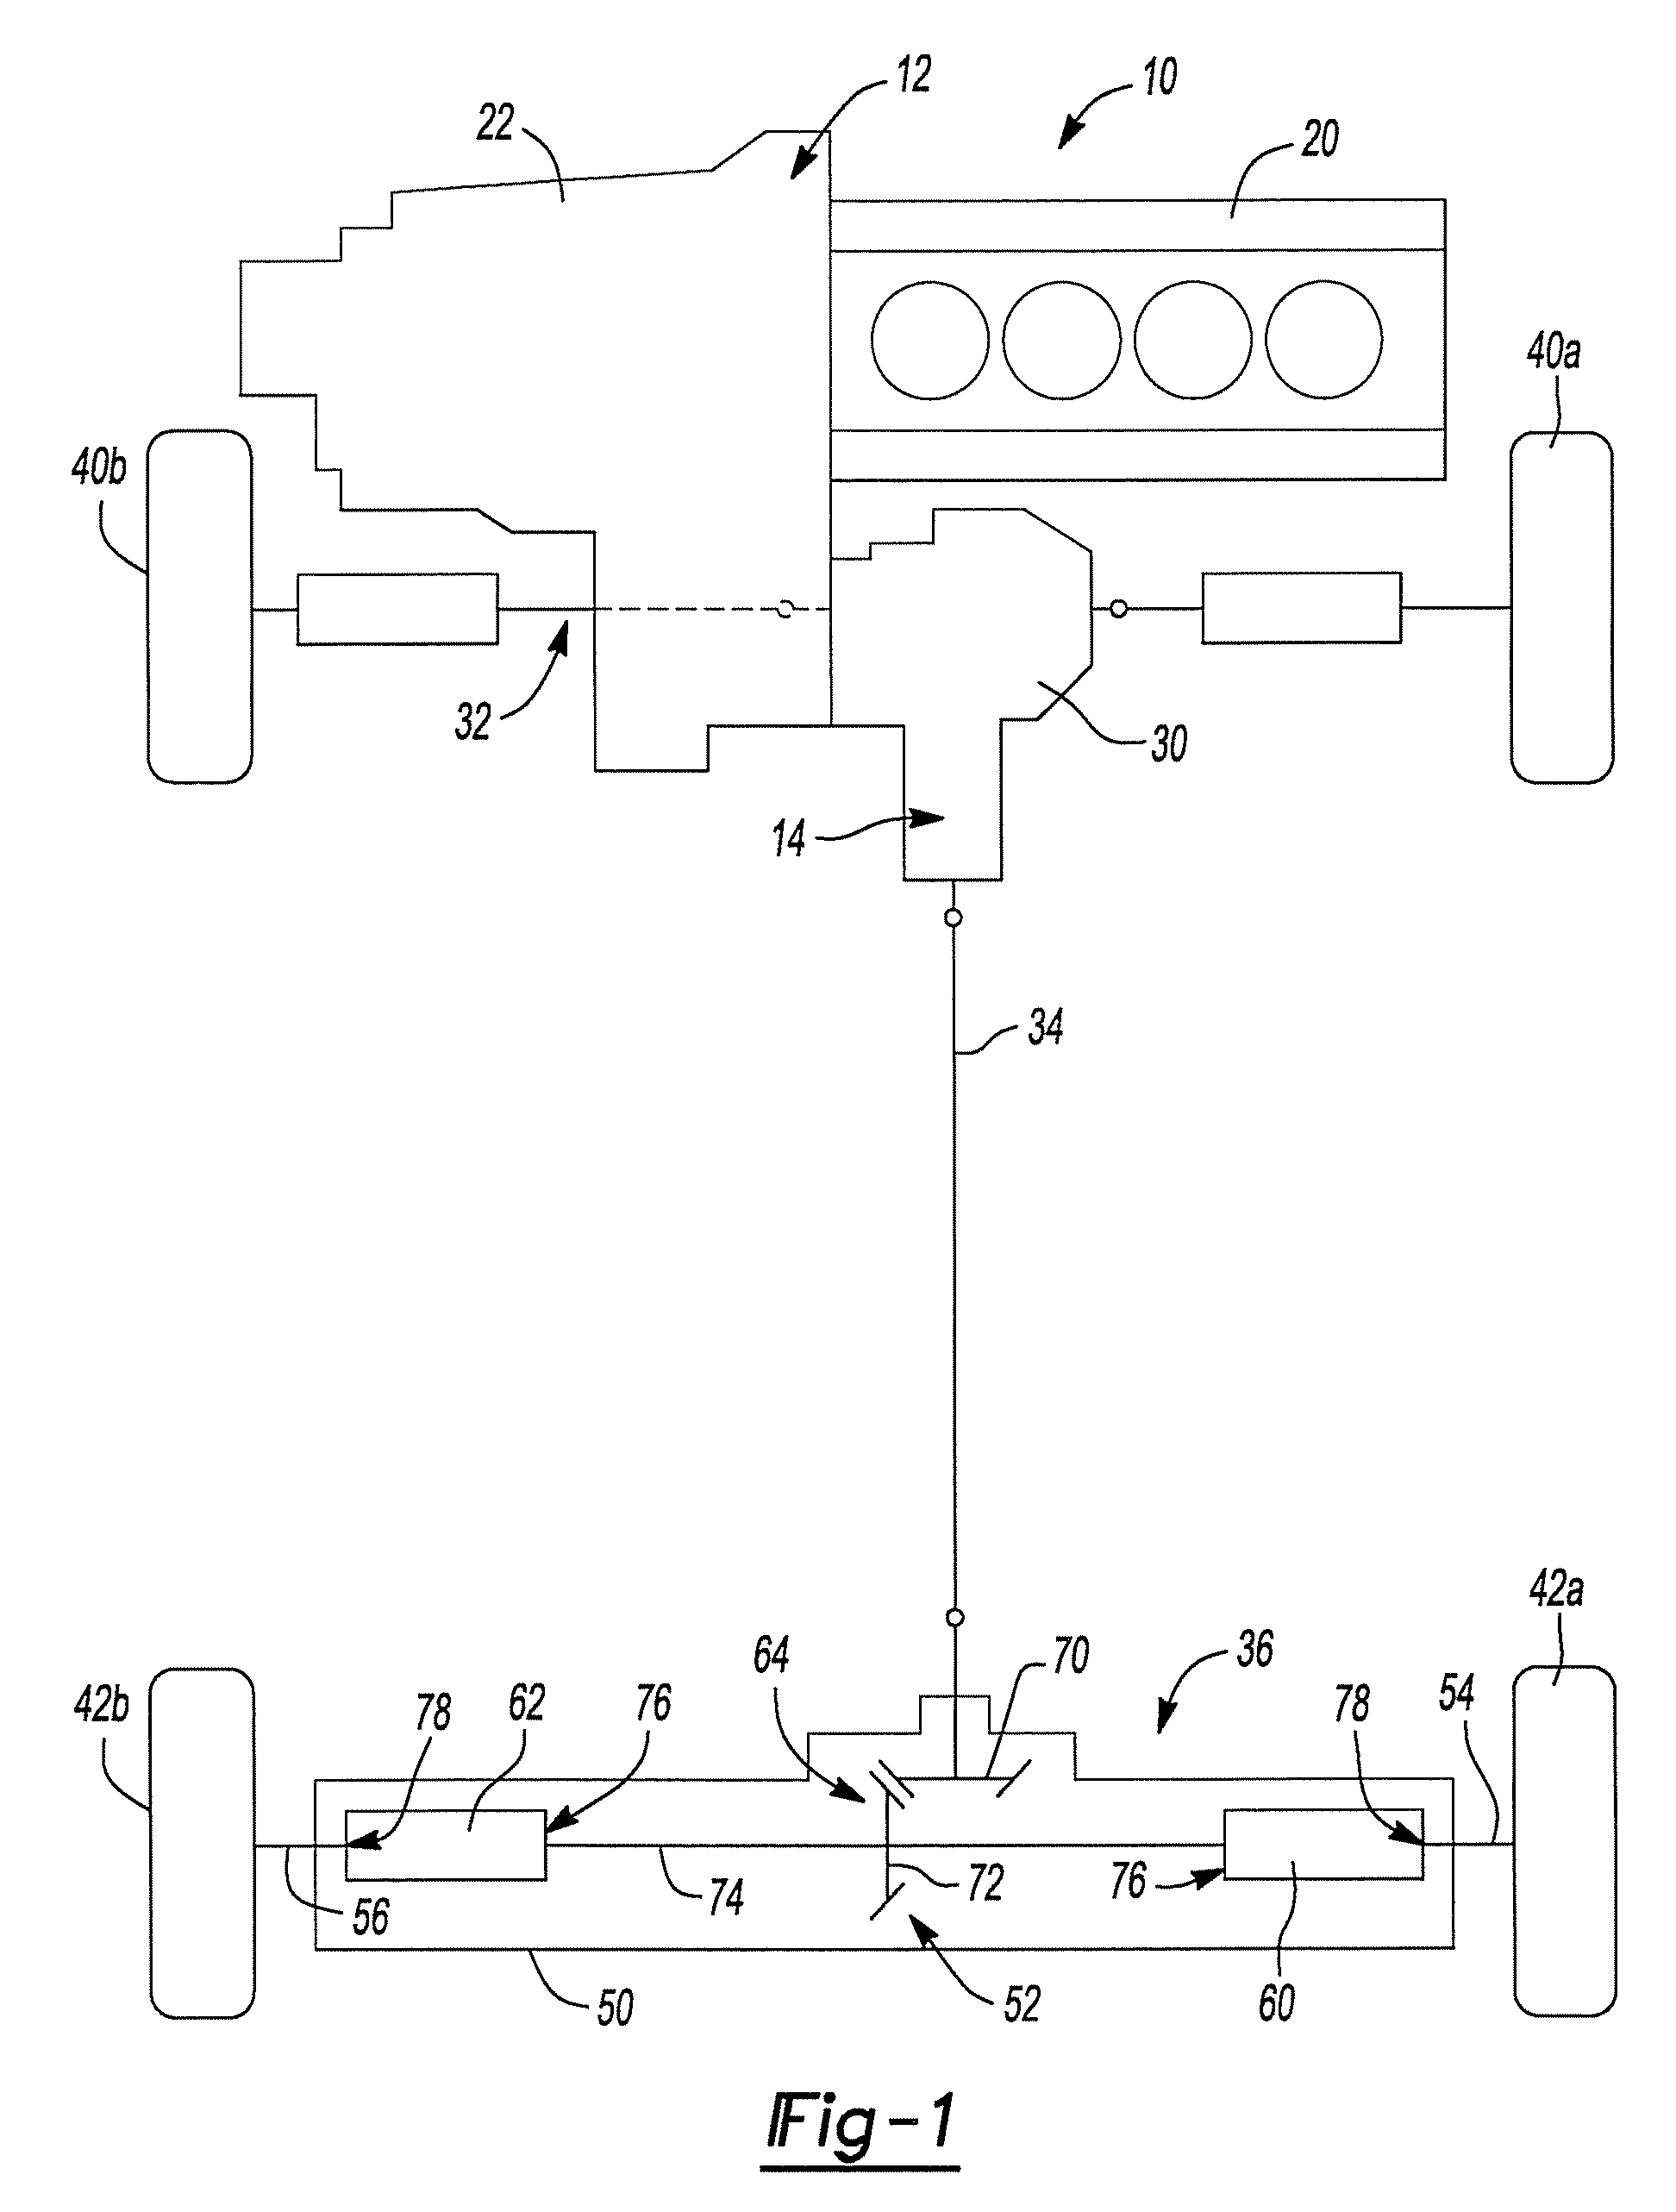 Continuously variable torque vectoring axle assembly